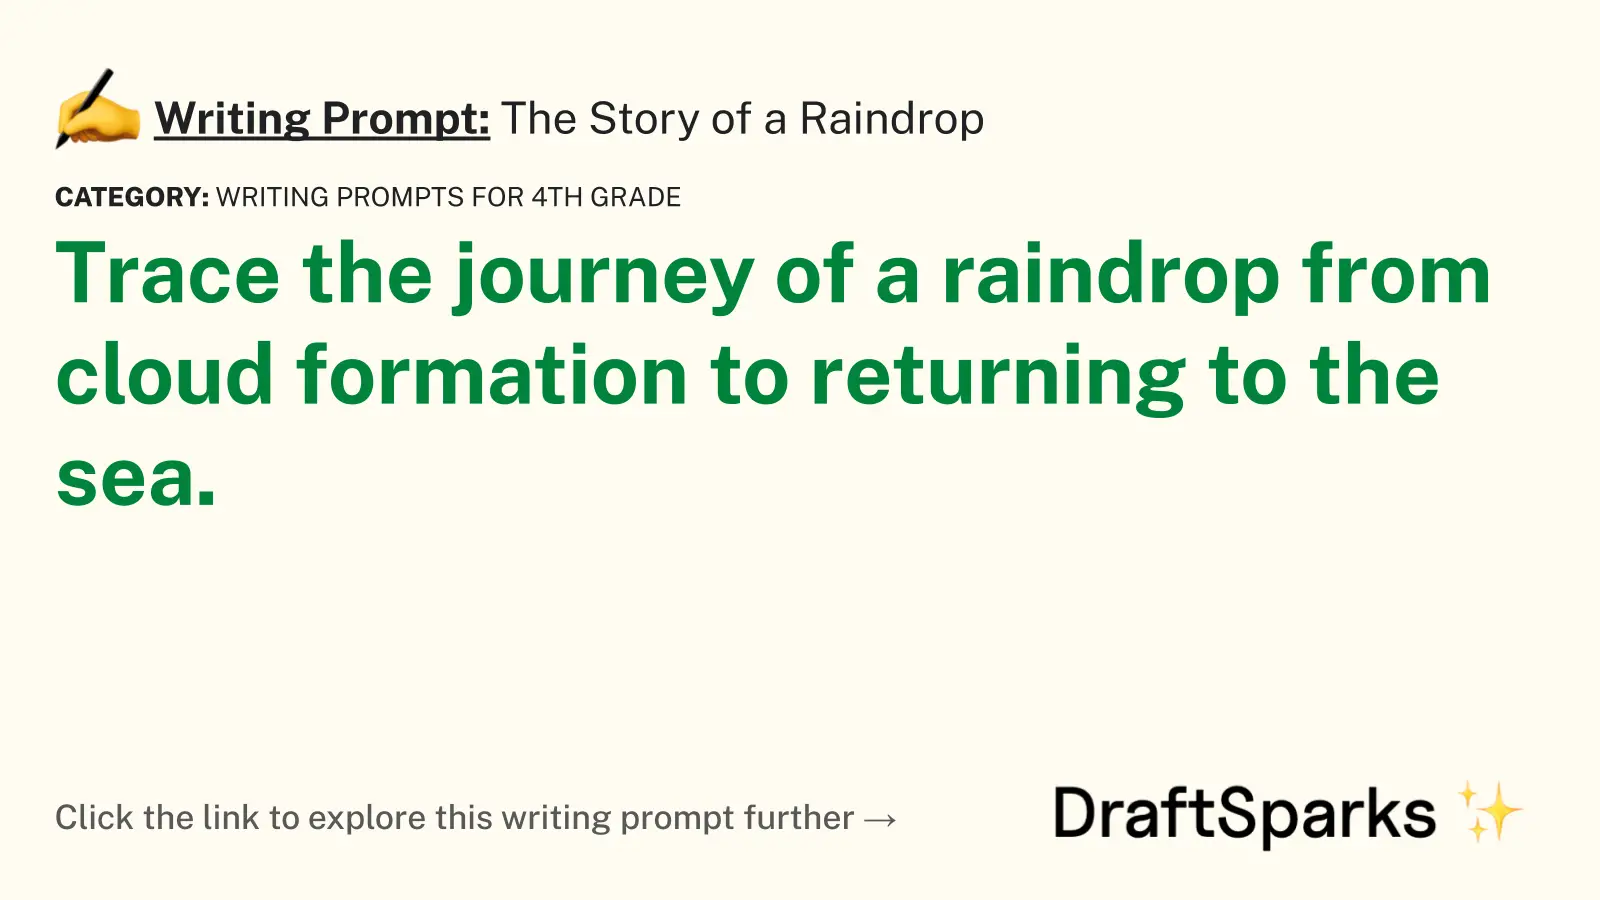 The Story of a Raindrop